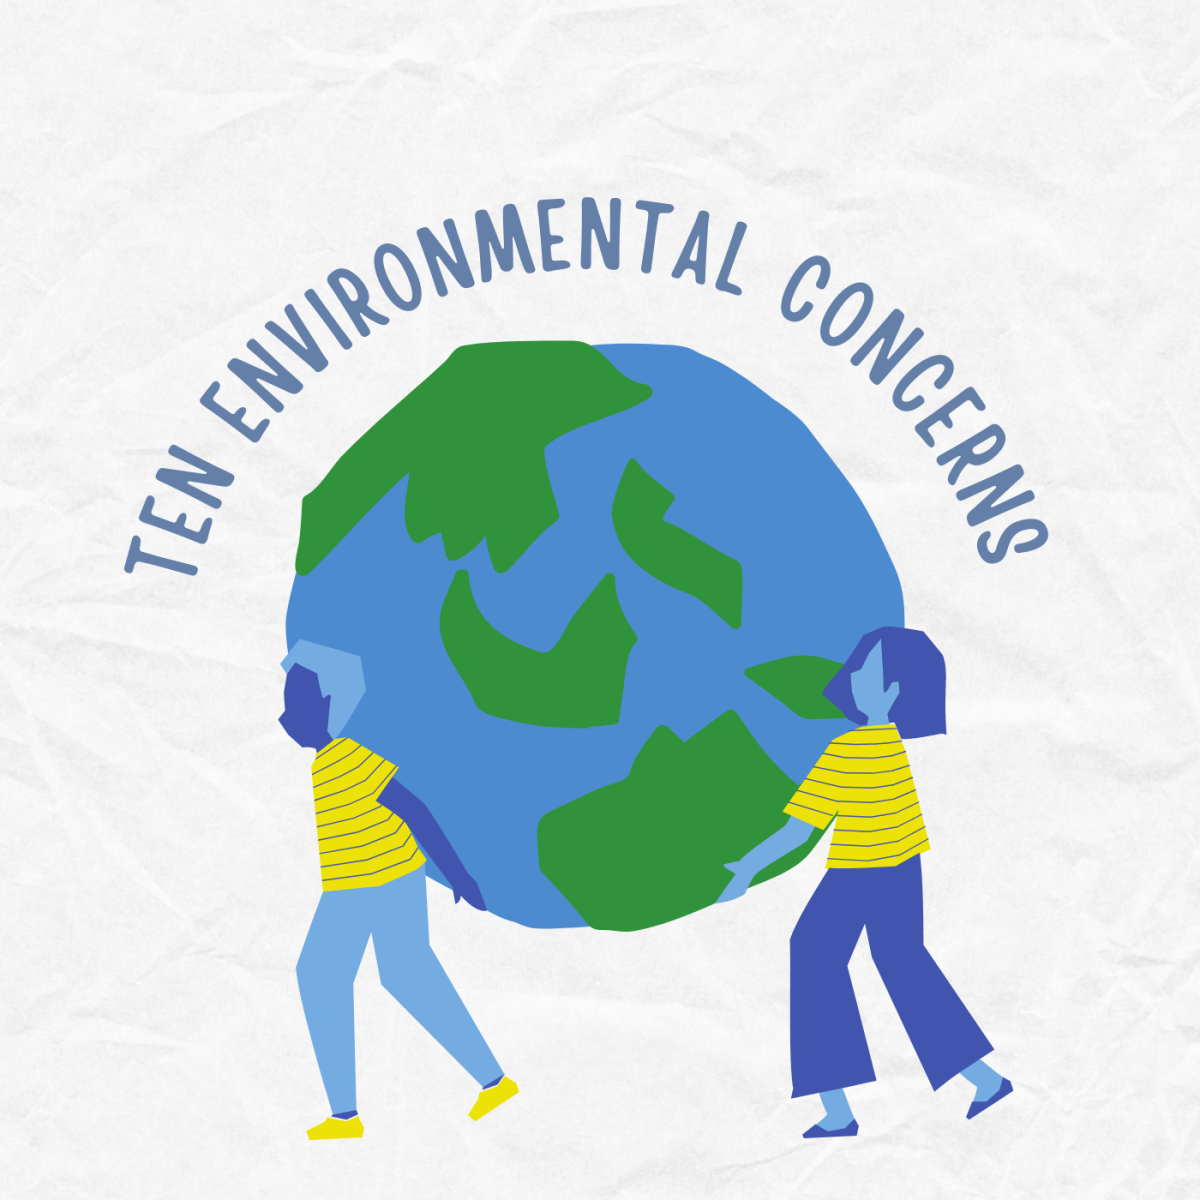 Top Ten Environmental Concerns of the 21st Century